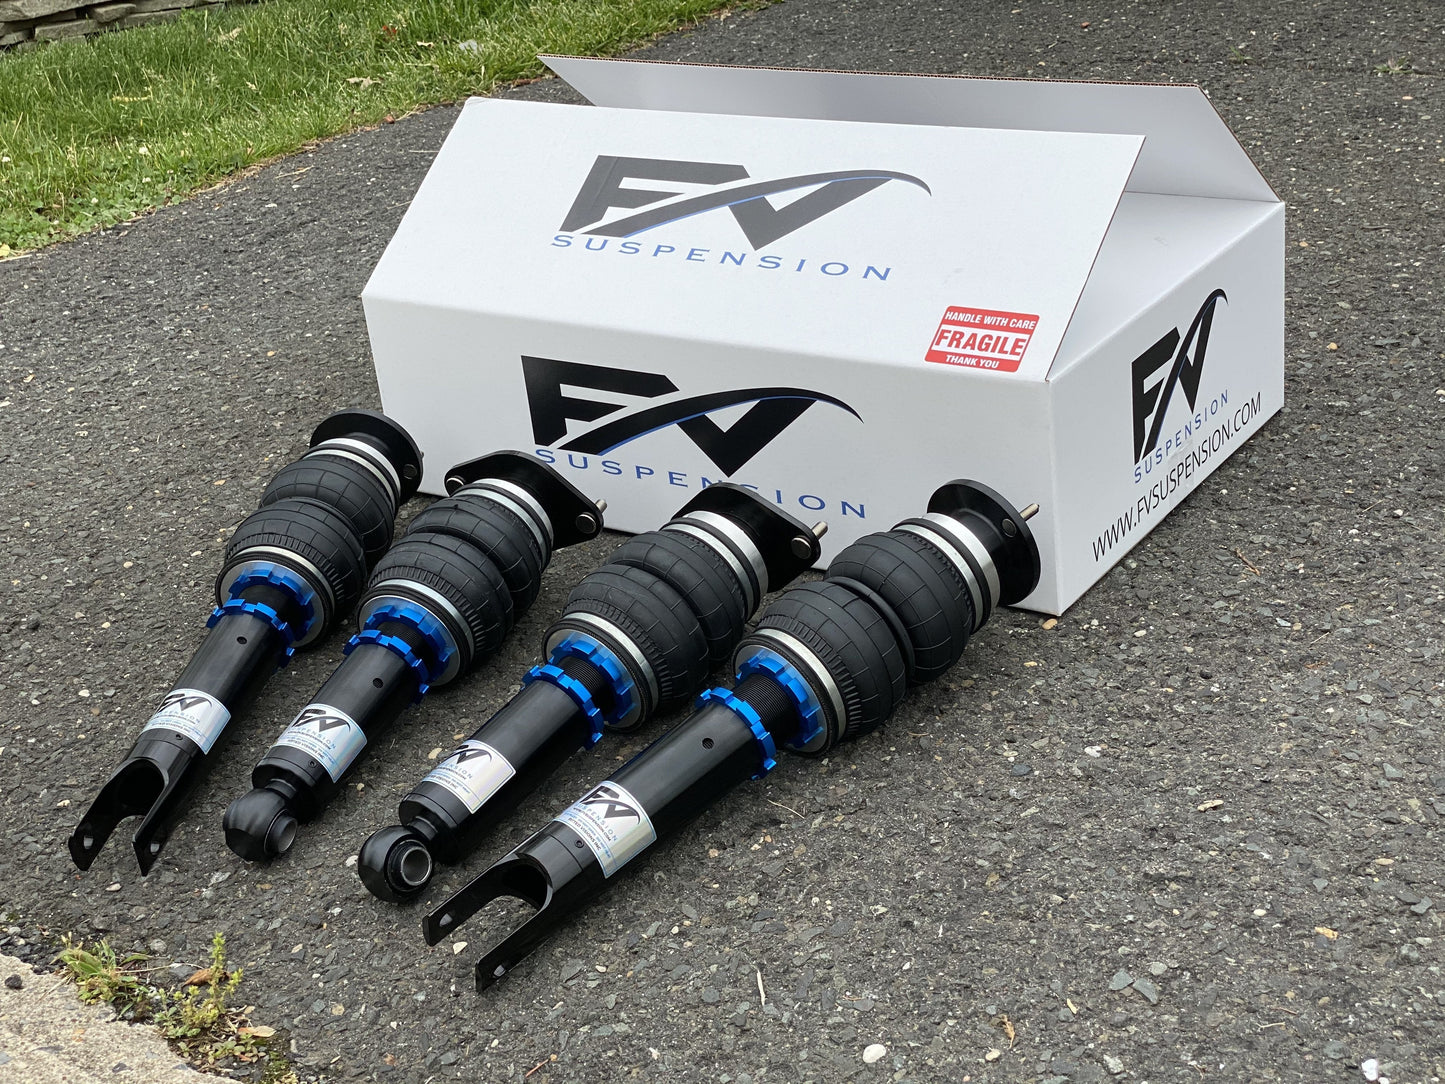 FV Suspension 3H Tier 3 Complete Air Ride kit for 87-91 Toyota Crown MS137 - Full Kit